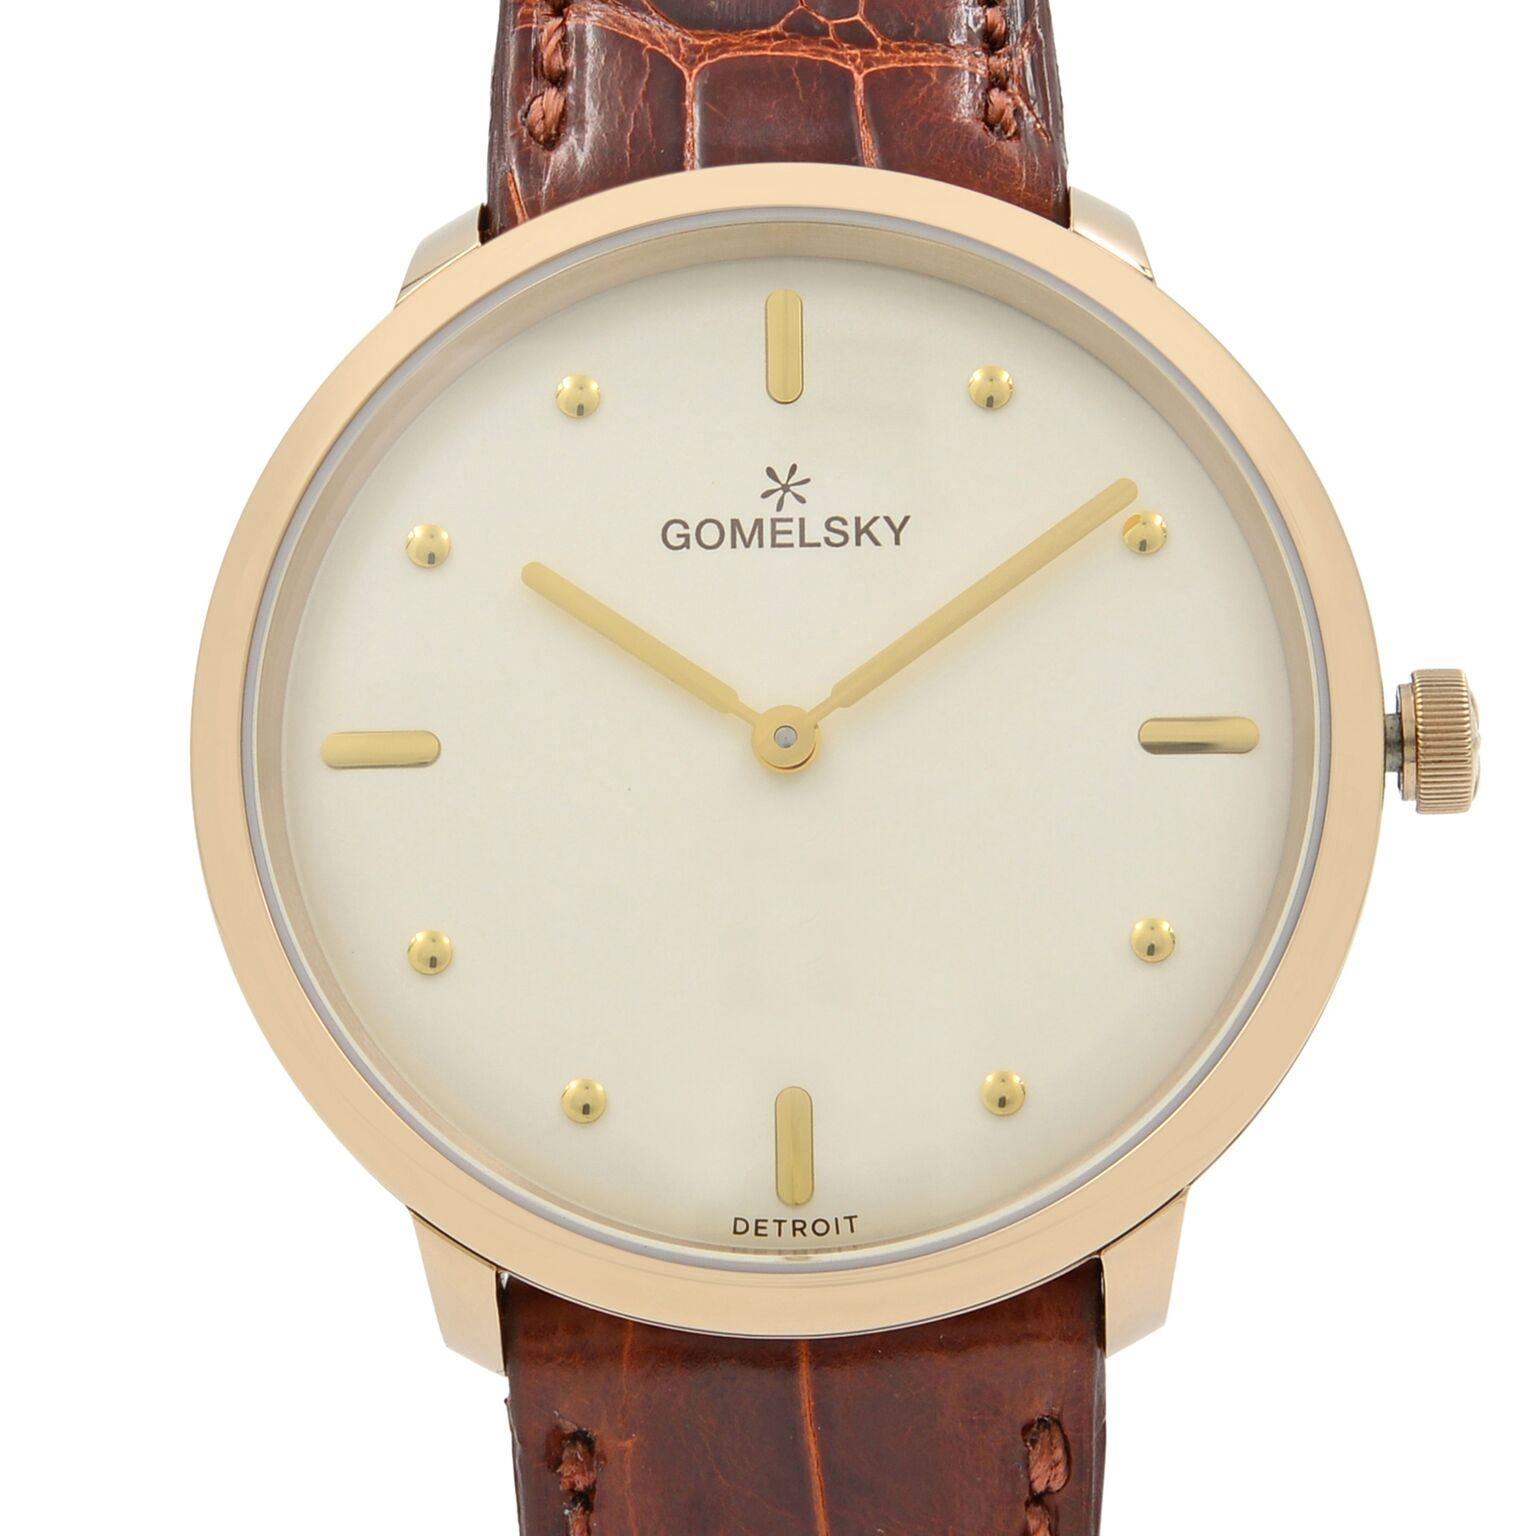 This brand new Gomelsky by Shinola Audry G0120112284 is a beautiful Ladies timepiece that is powered by a quartz movement which is cased in a stainless steel case. It has a round shape face,  dial, and has hand sticks & dots style markers. It is